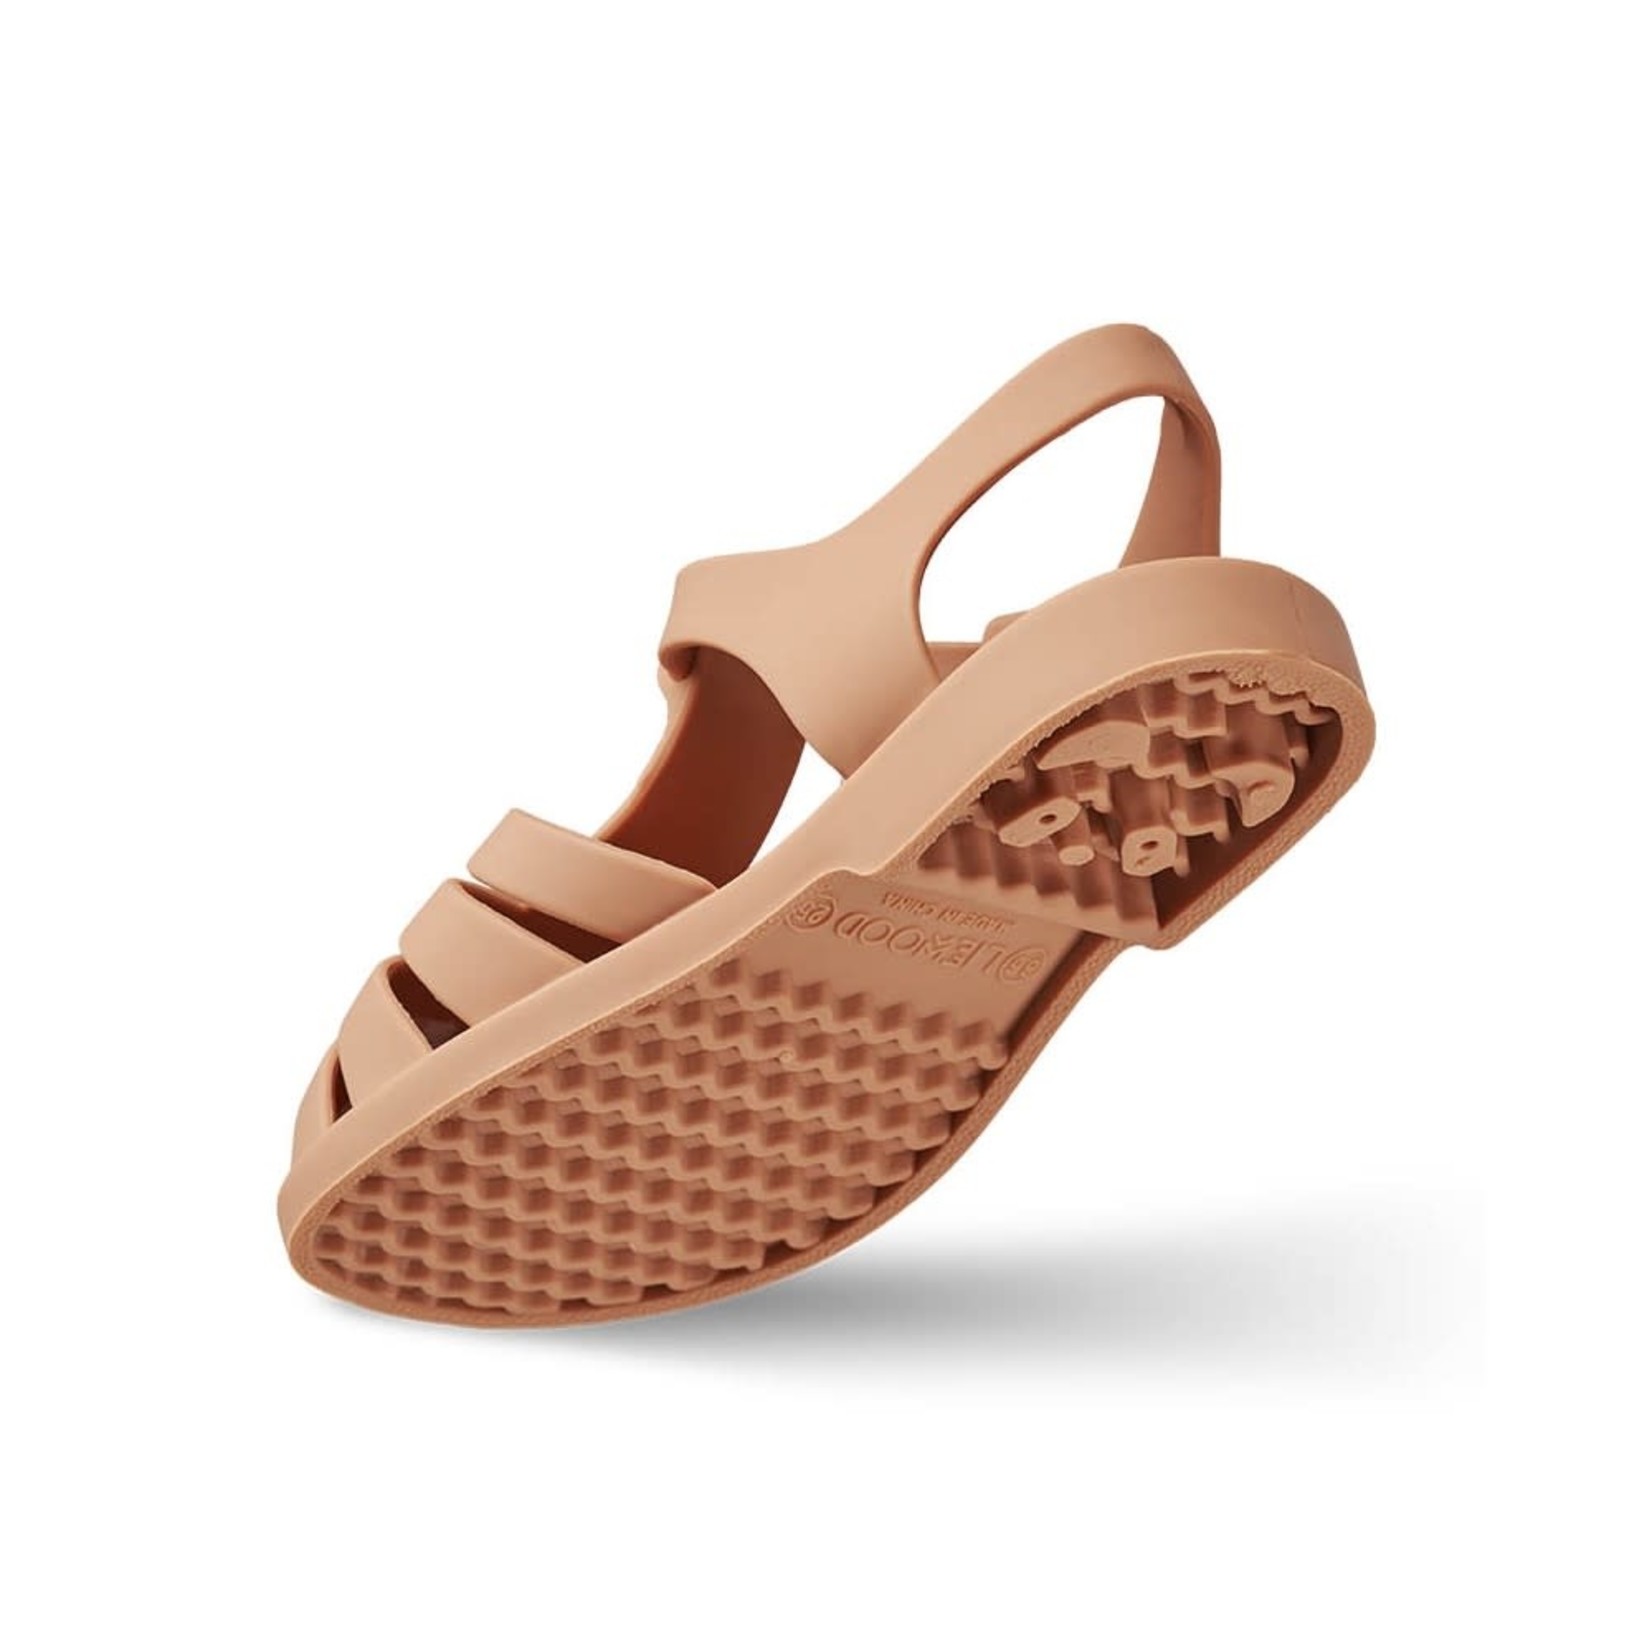 Liewood Liewood Bre sandals - Papay